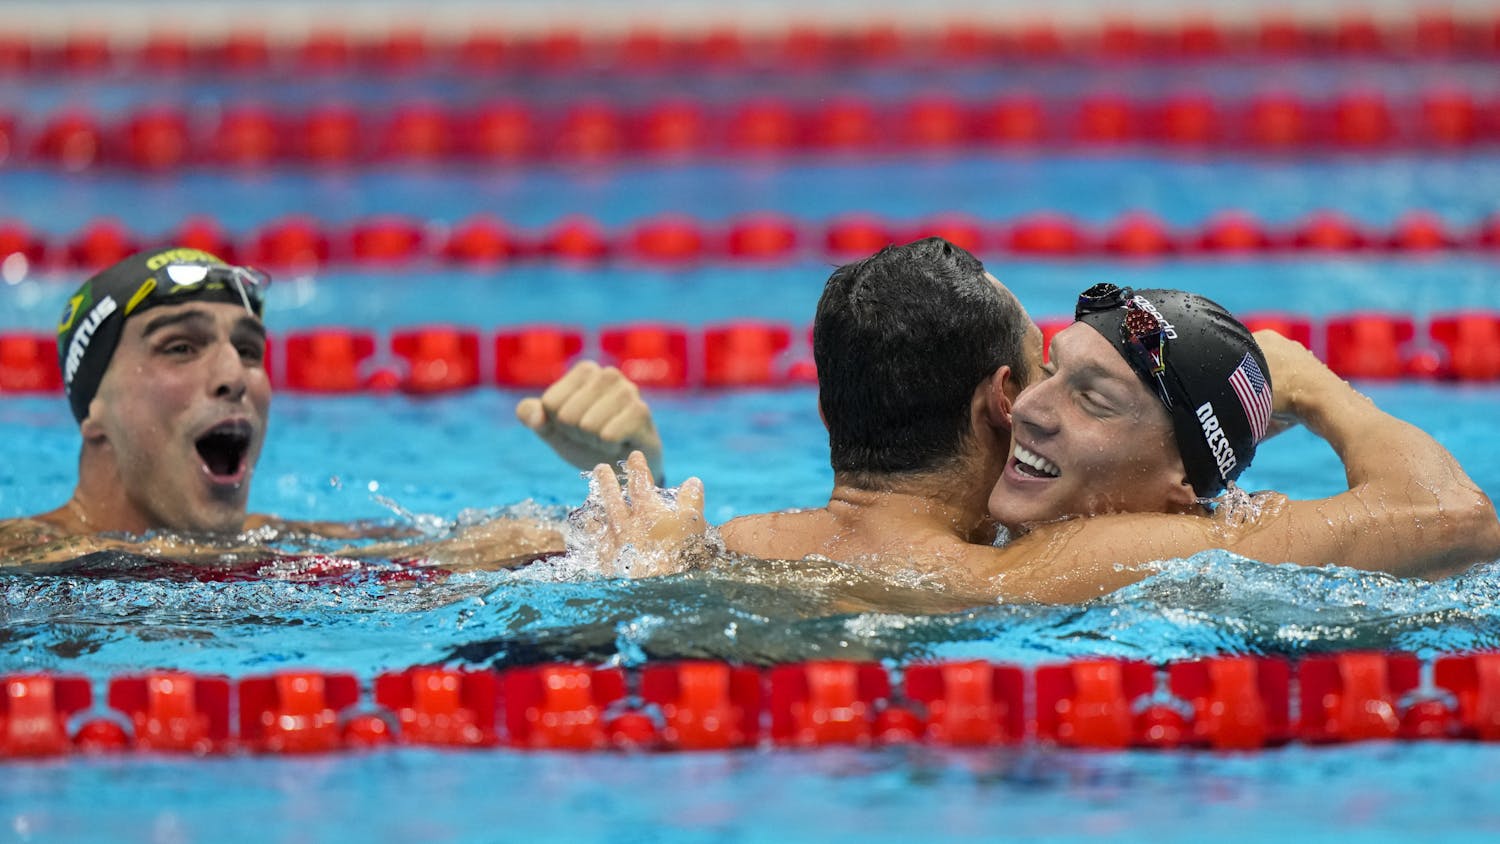 Caeleb Dressel, of United States, celebrates after winning the gold medal in a men's 50-meter freestyle fiat the 2020 Summer Olympics, Sunday, Aug. 1, 2021, in Tokyo, Japan. At left Bruno Fratus, of Brazil, celebrates winning the bronze medal. (AP Photo/David Goldman)